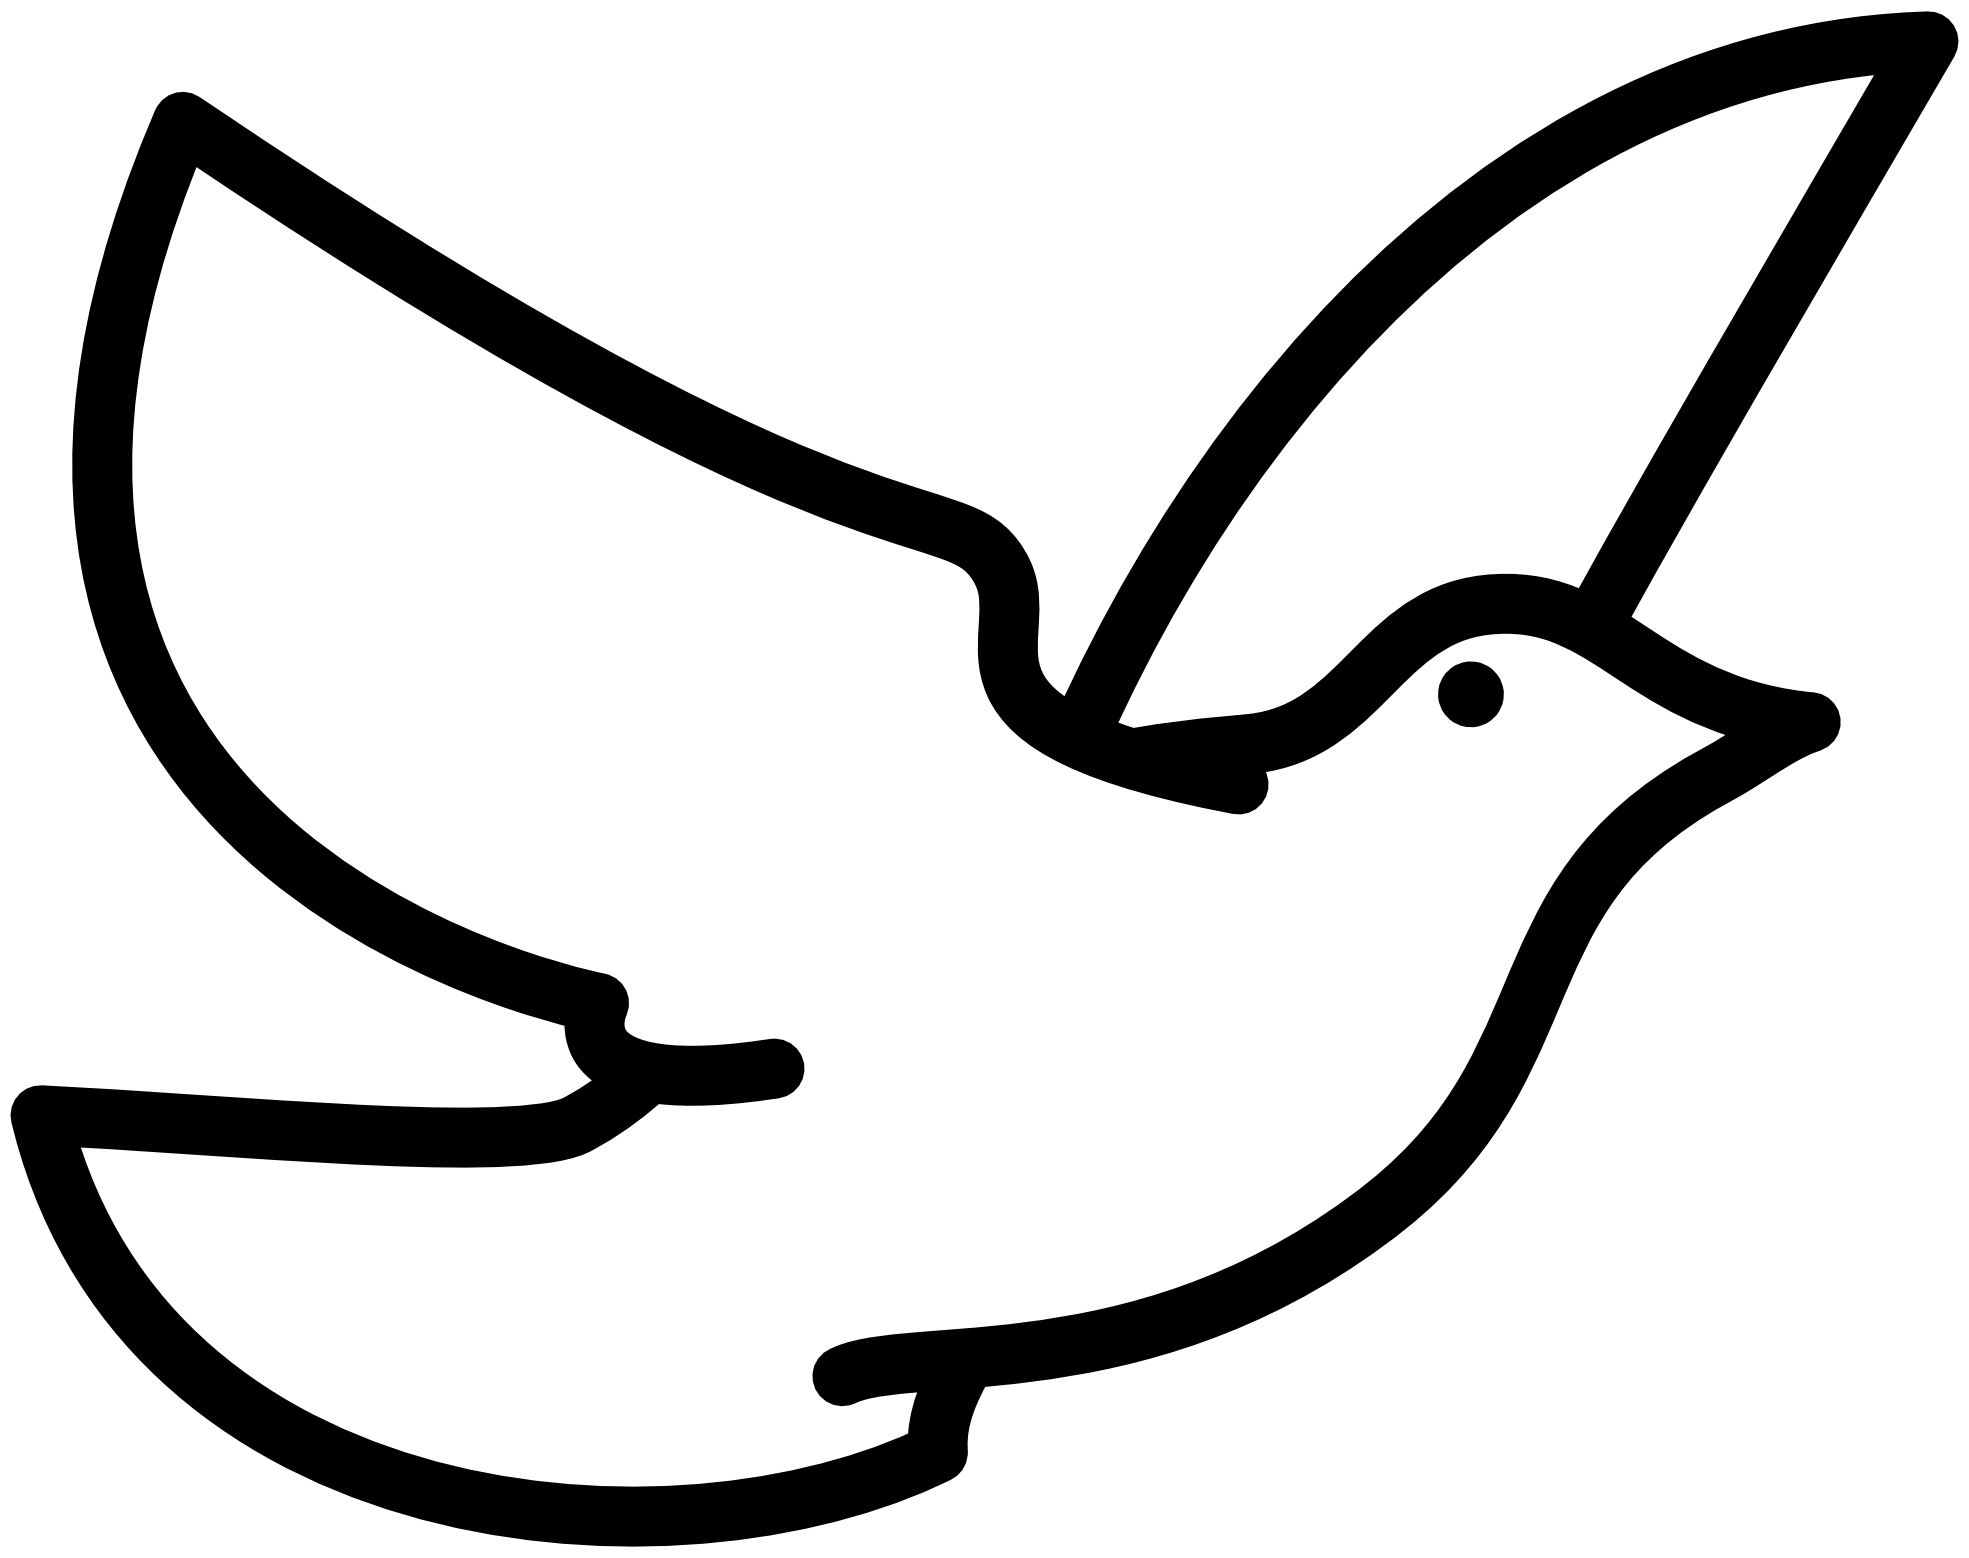 Fly Clipart Black And White Black And White Bird Flying Drawingdove